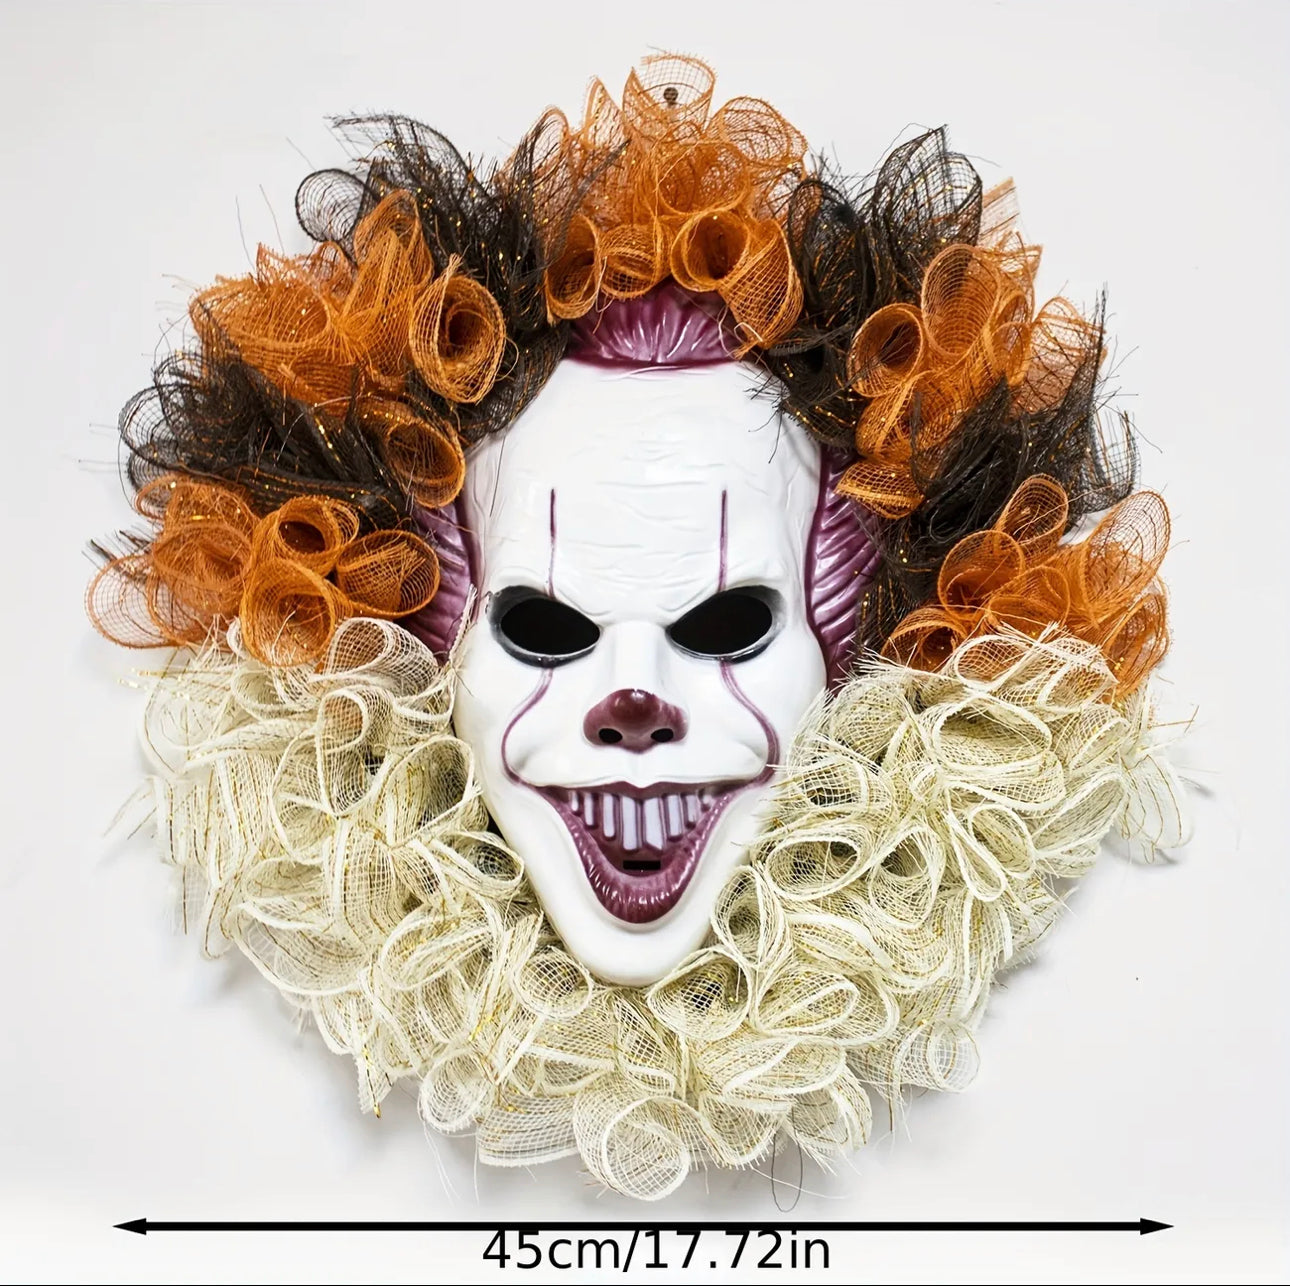 1pc Halloween Clown Horror Wreath - Perfect for Family Holiday Decorations!